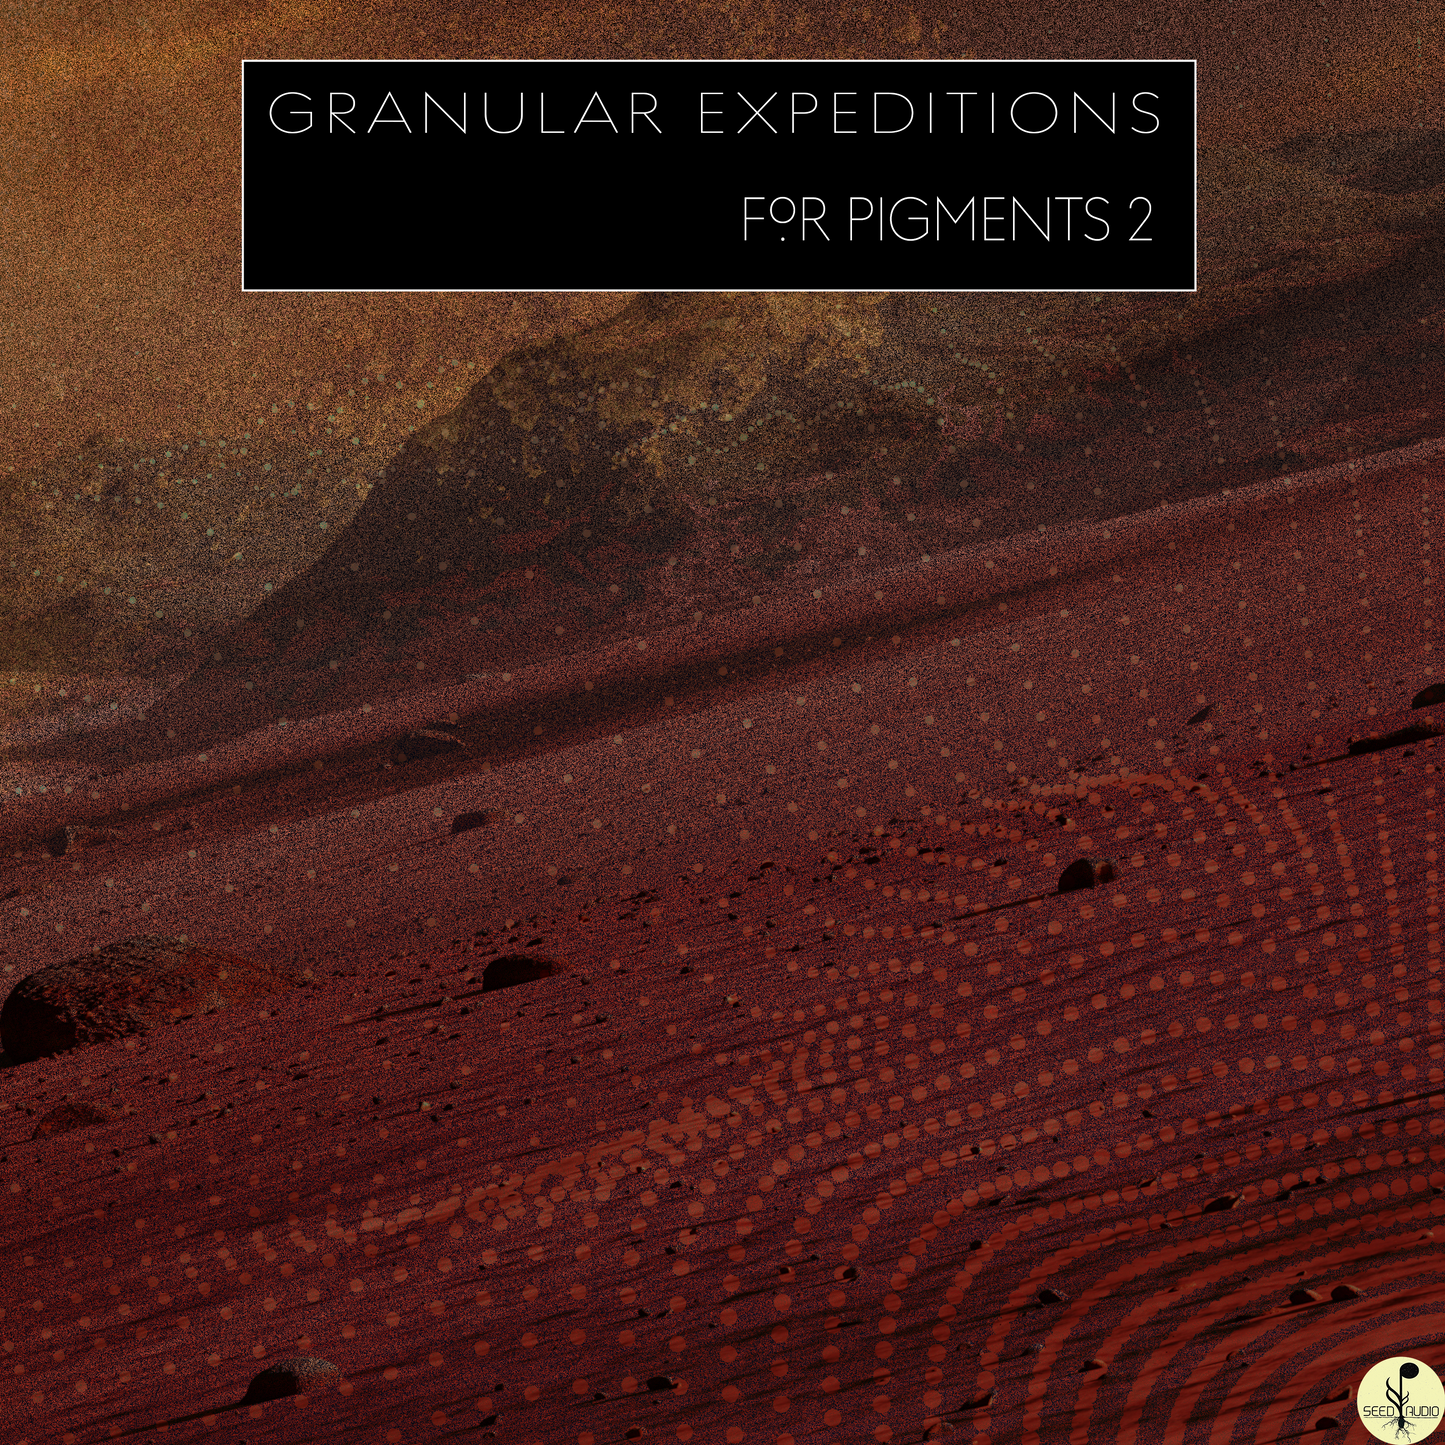 Granular Expeditions for Pigments